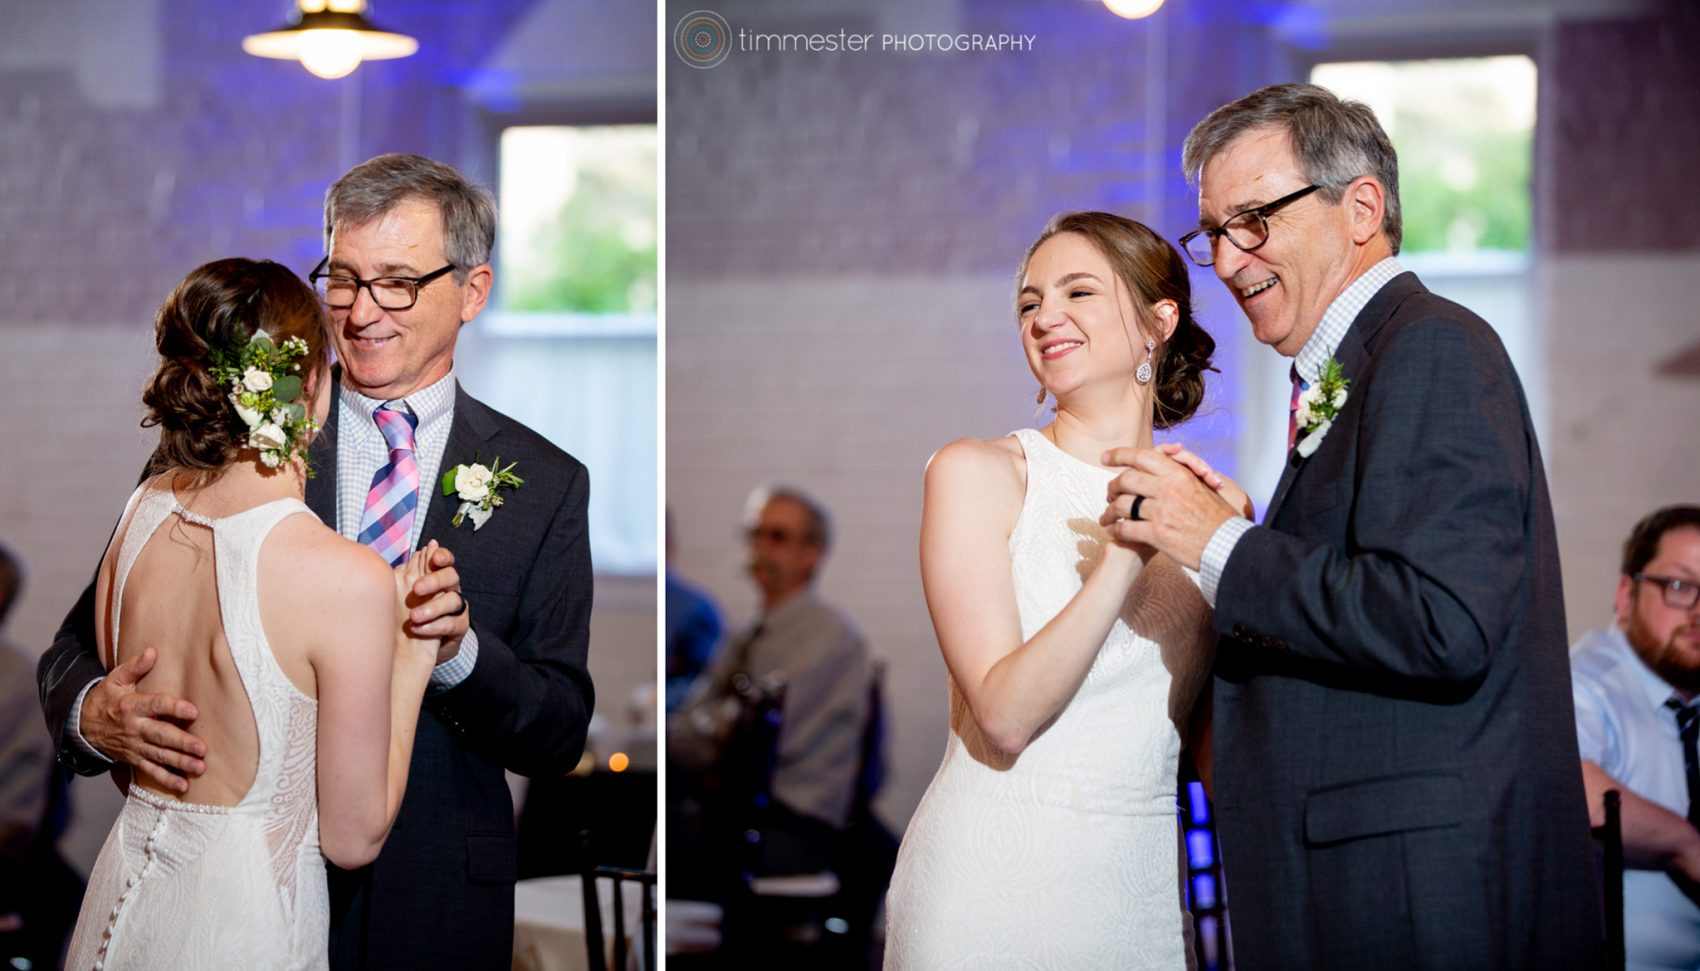 The father daughter dance at Sarah & Jacob's wedding reception in Raleigh at Traine.